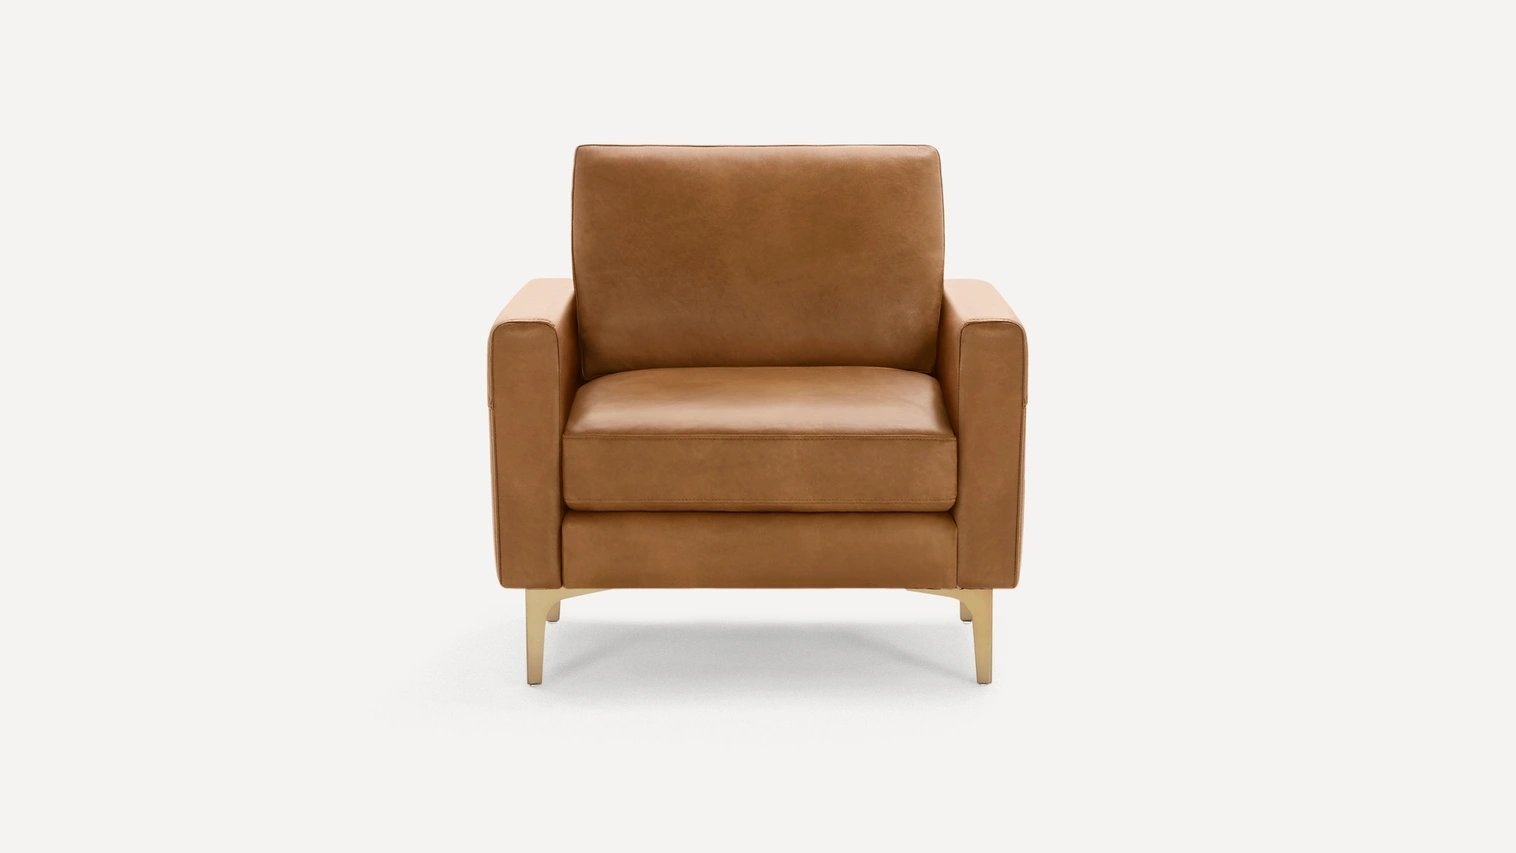 Nomad Leather Club Chair in Camel, Brass Legs - Image 0